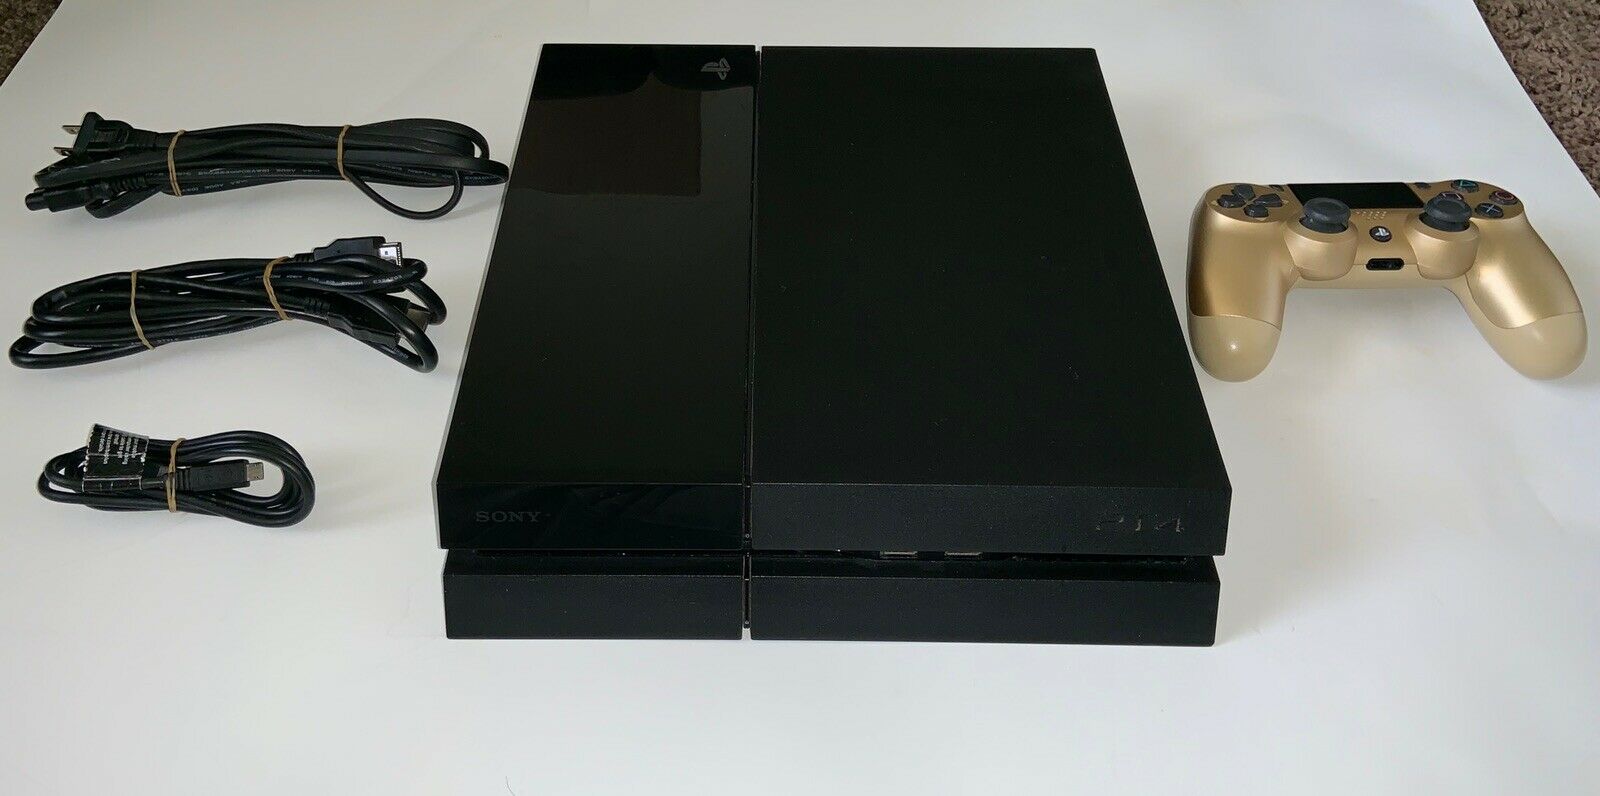 Sony Playstation4 Model CUH-1001A (REFURBISHED AND TESTED) - iCommerce on Web